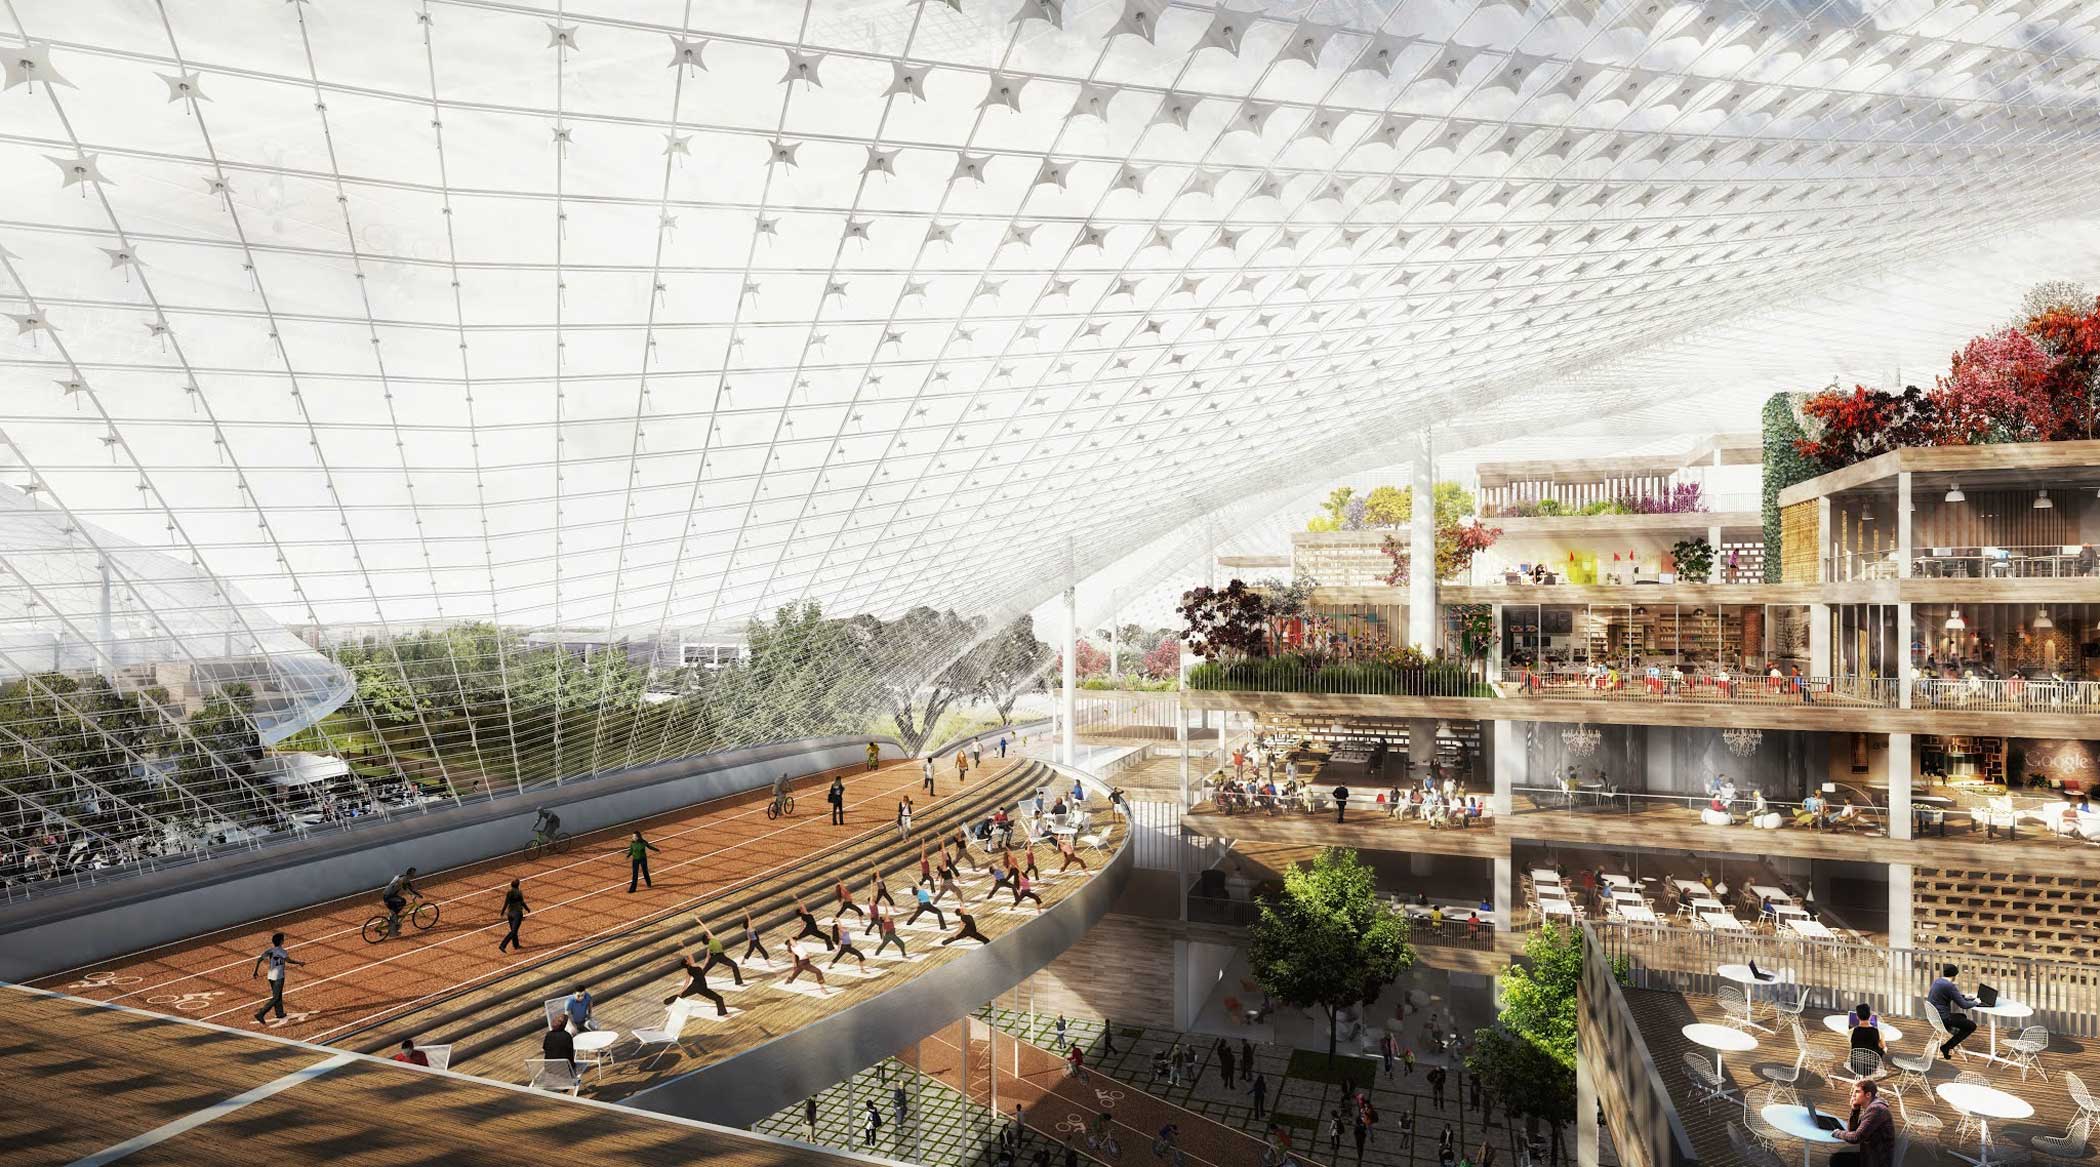 This rendering shows the inside of the proposed Charleston South building looking west. Within the canopy, building segments operate like furniture—light, tactile and reconfigurable. These segments form small villages where employees can work or relax. The Green Loop goes through the building. The rim of the canopy provides structure as well as biking and walking paths.